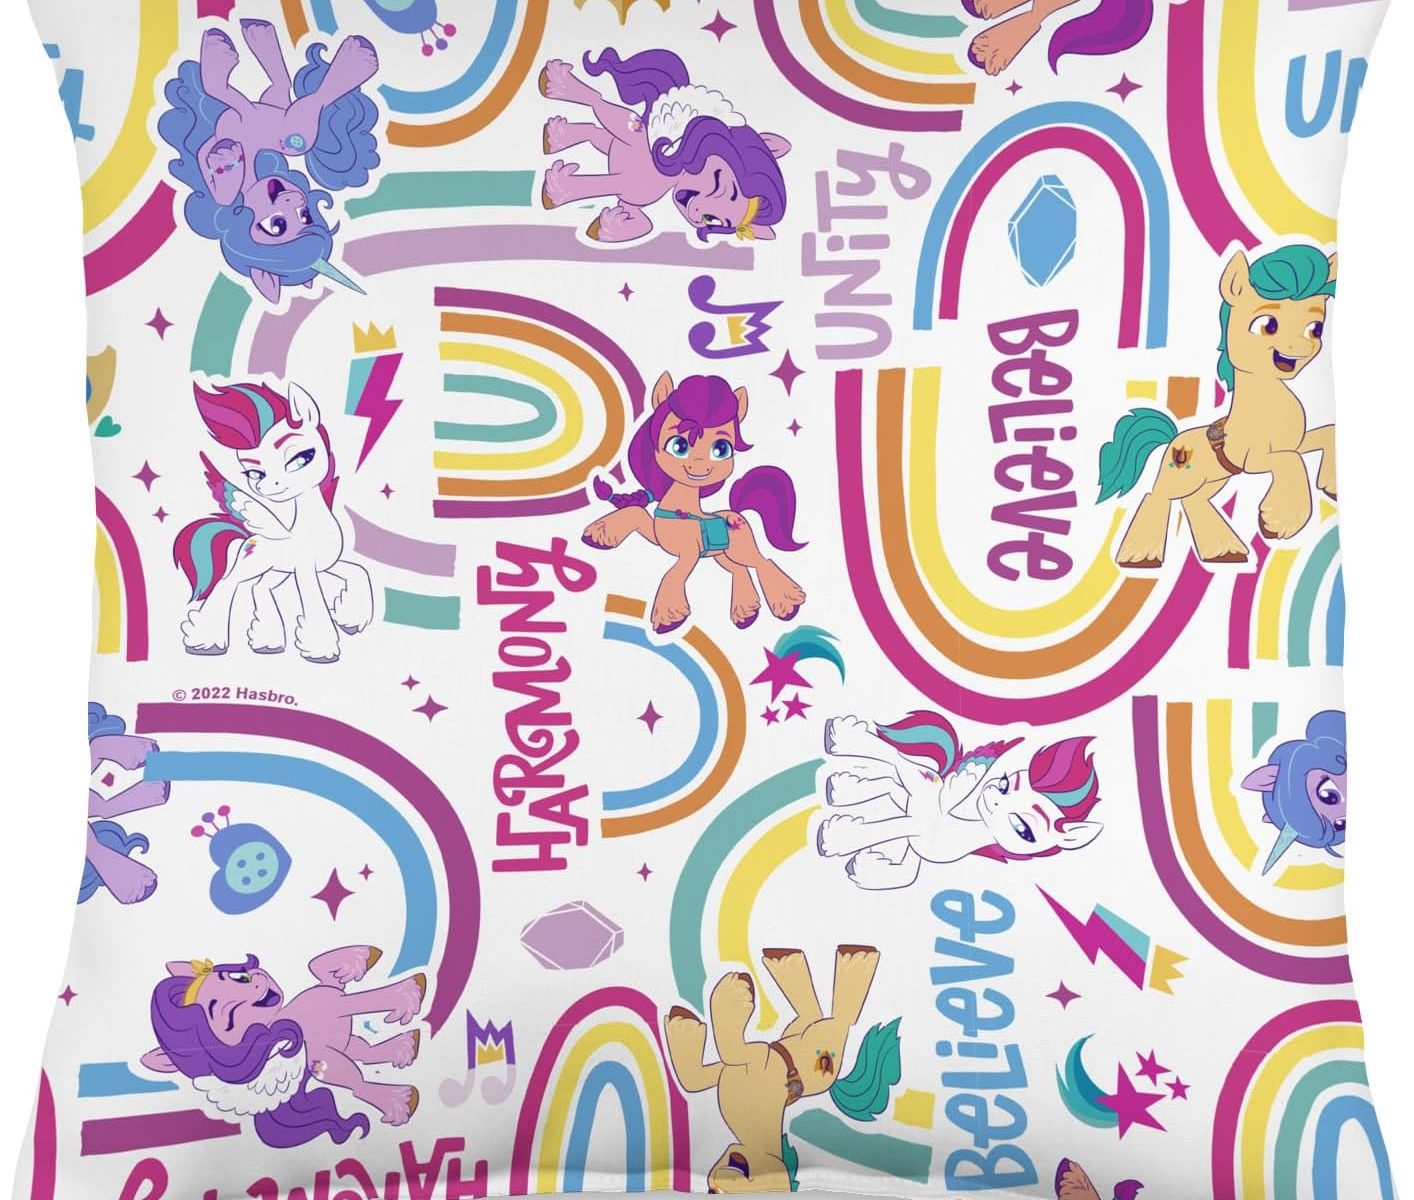 MLP: ANG Ponies & Rainbows Pattern 16x16 Throw Pillow 1